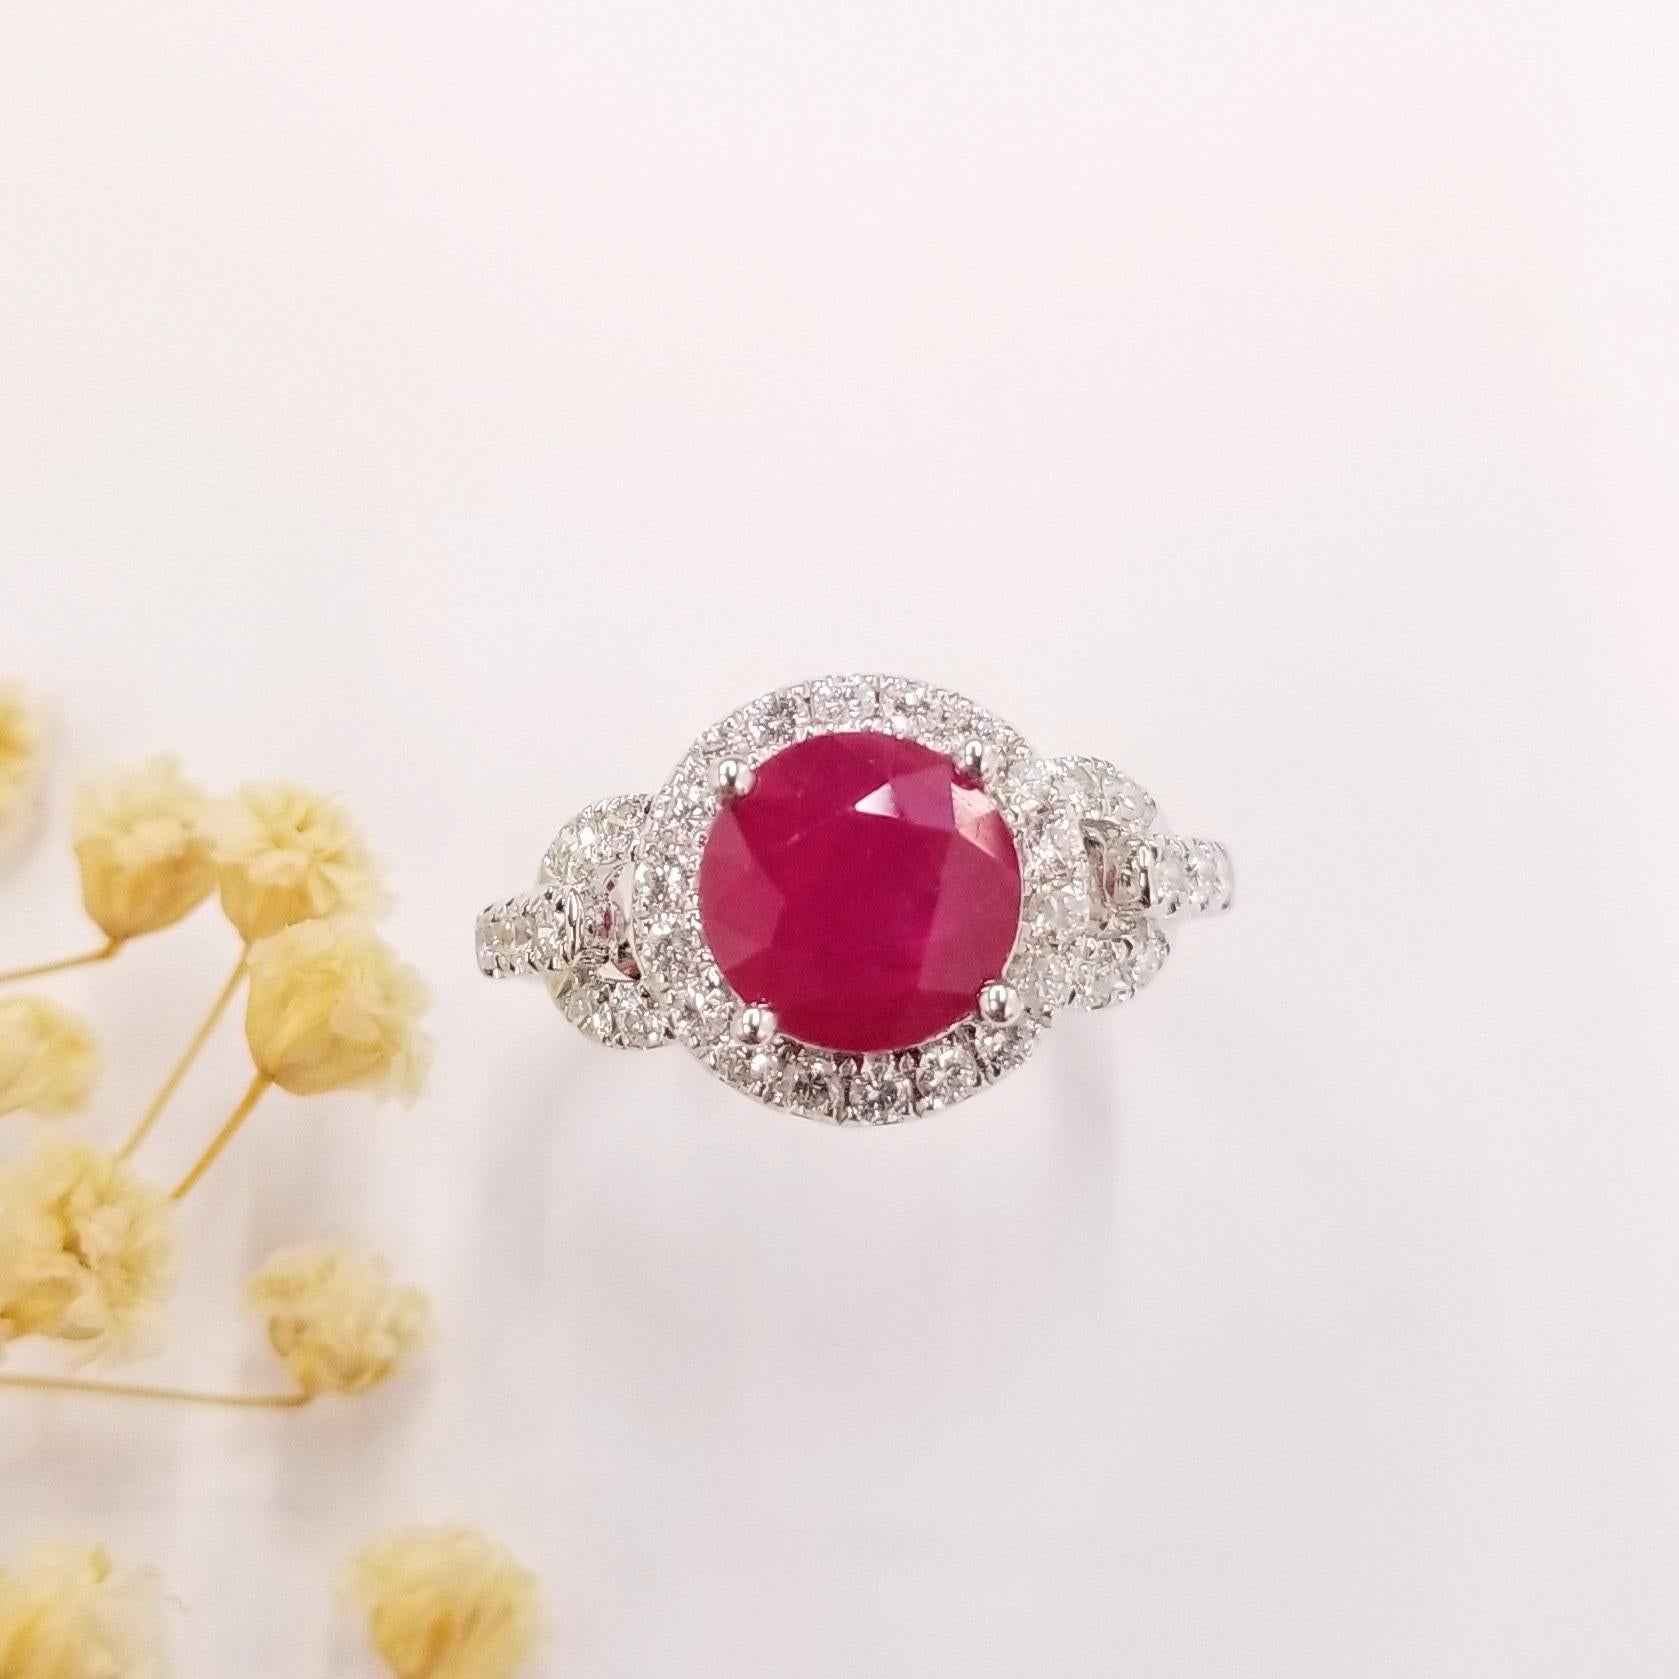 Elevate your style with this enchanting chain-style ring crafted in 18K white gold, featuring a captivating 3.10 carat deep red Burma ruby in a rare and perfect round shape. This exquisite ruby showcases a rich, velvety red hue that exudes passion